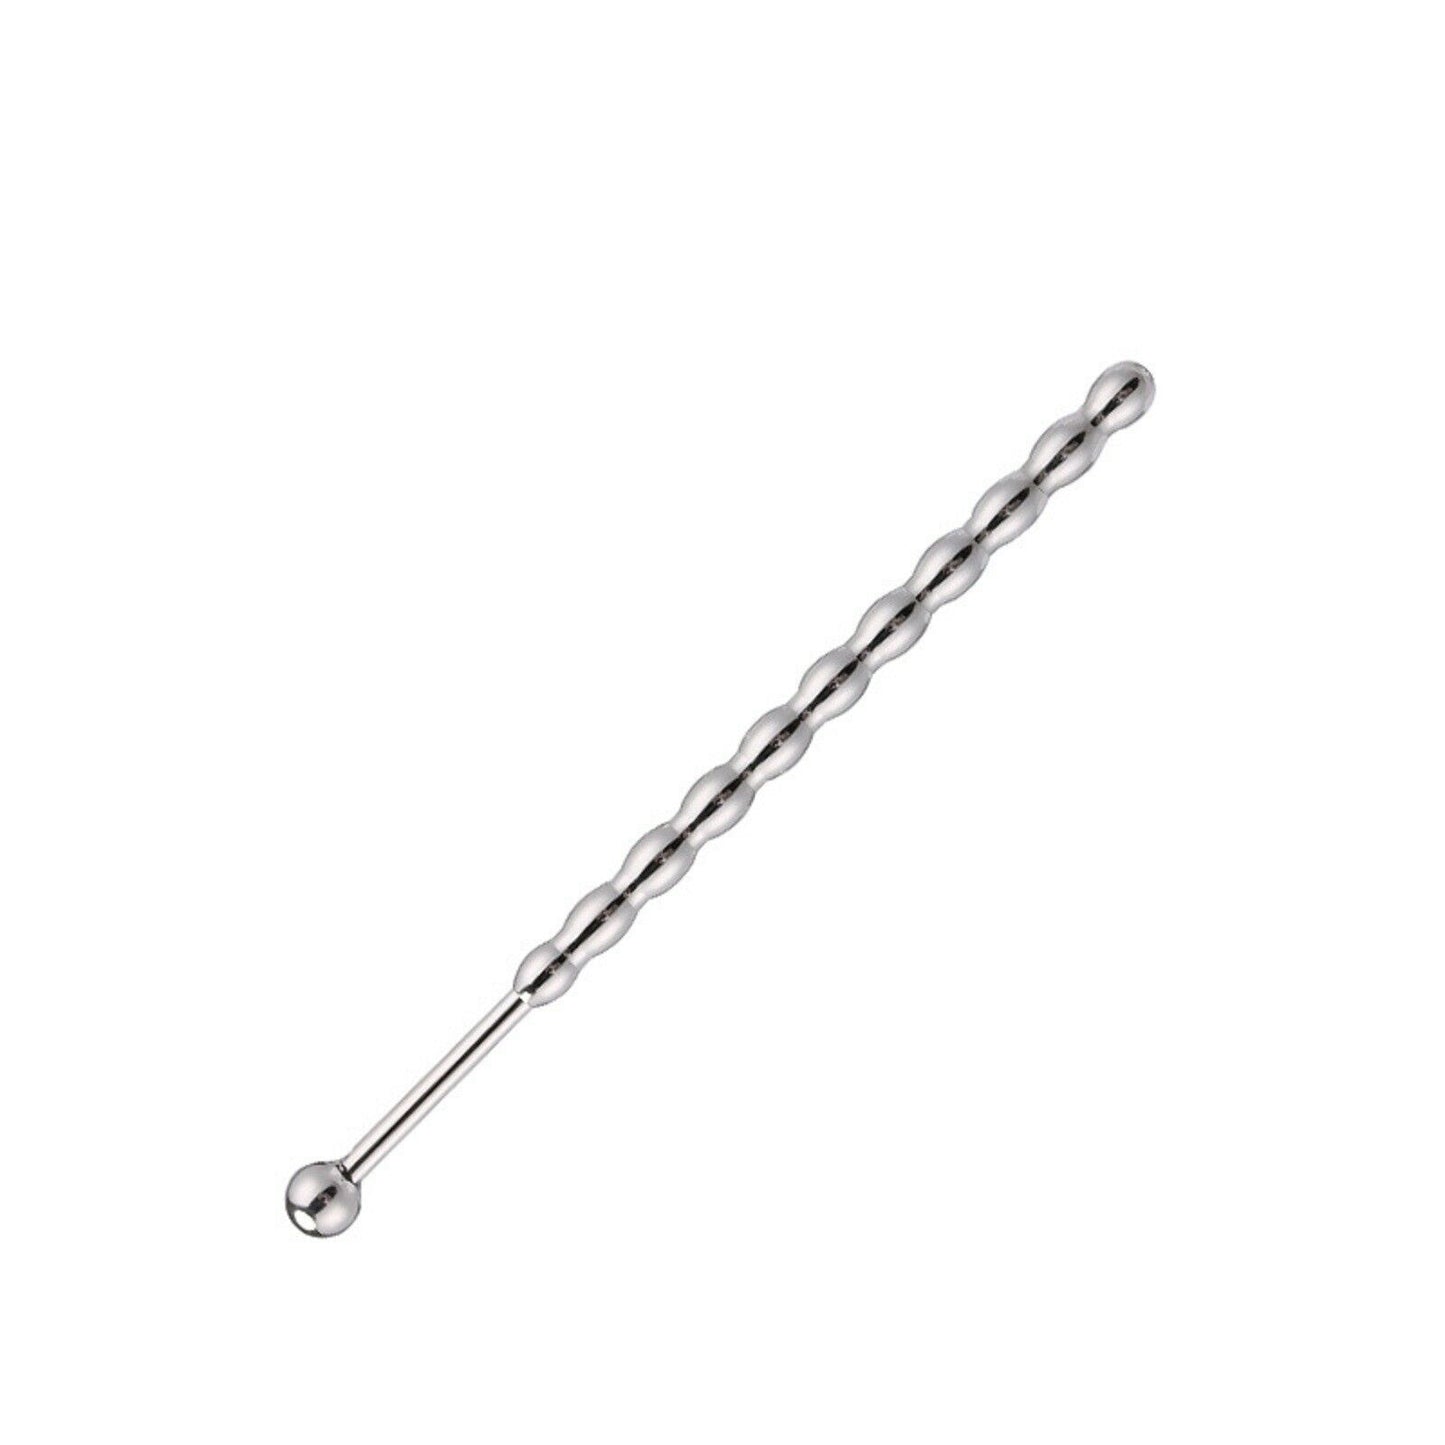 Stainless Steel Urethral Sound Ribbed Penis Plug Cock Catheter Rod Sex Toy NEW